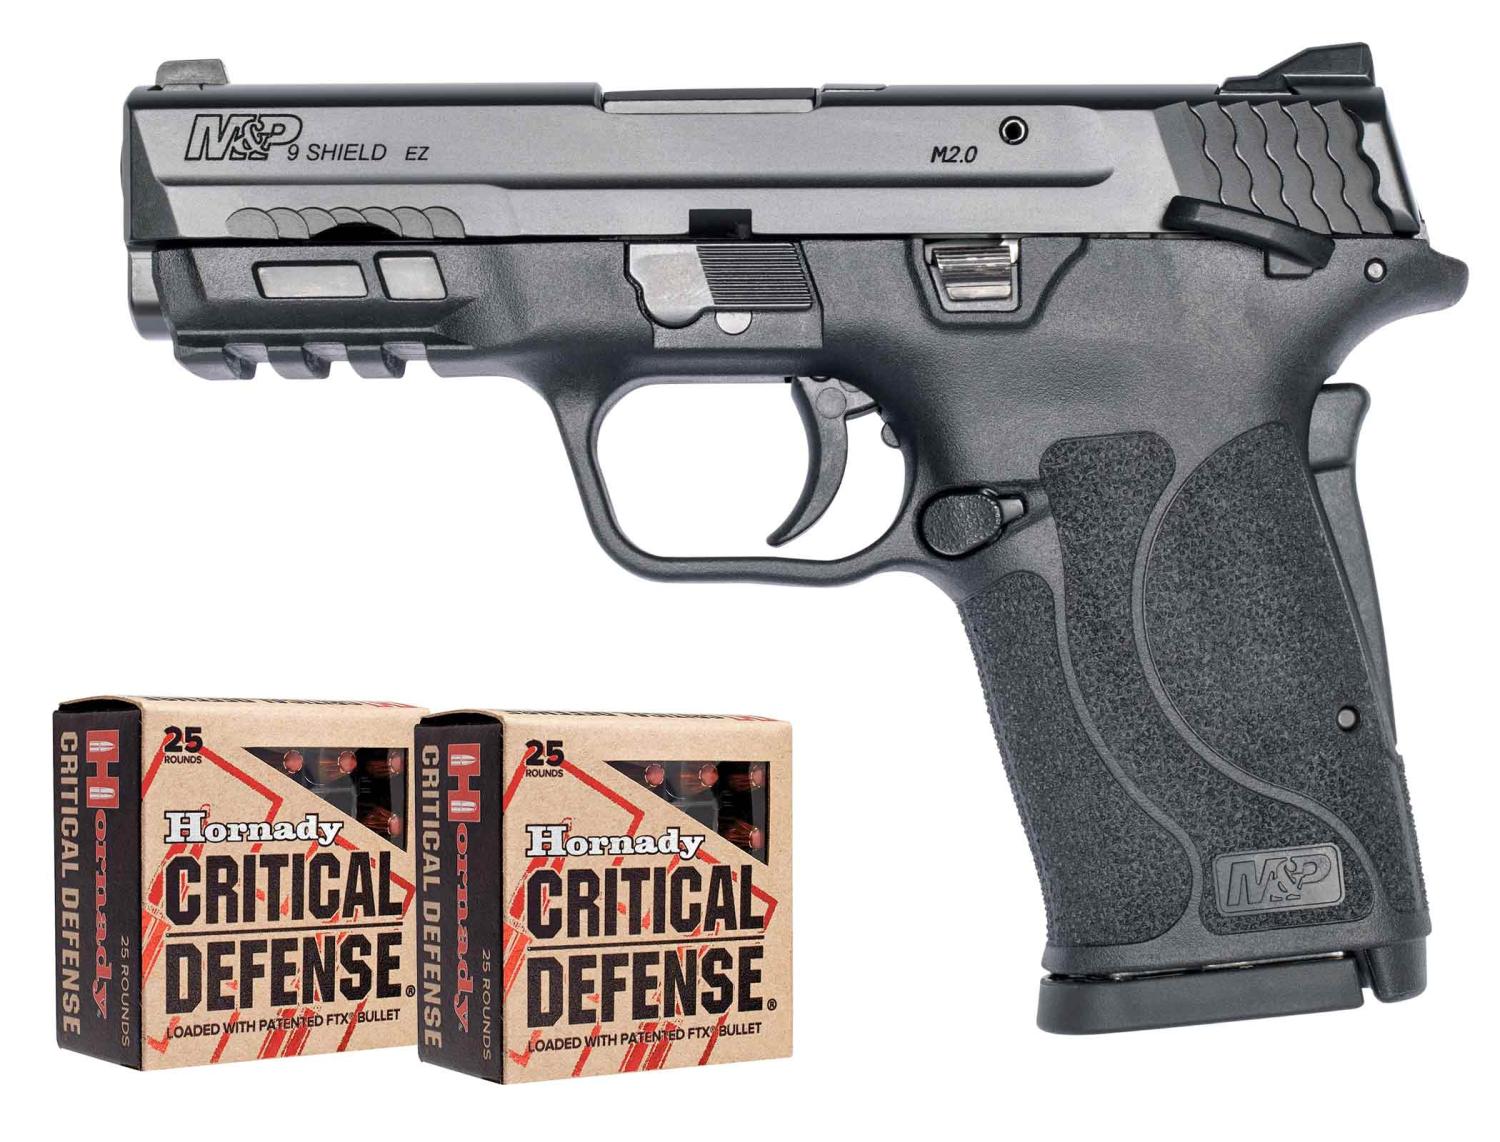 SMITH & WESSON Shield EZ 9mm 3.6in Black 8rd +2 Boxes of Hornady Ammo - $479.93 (Free S/H on Firearms)